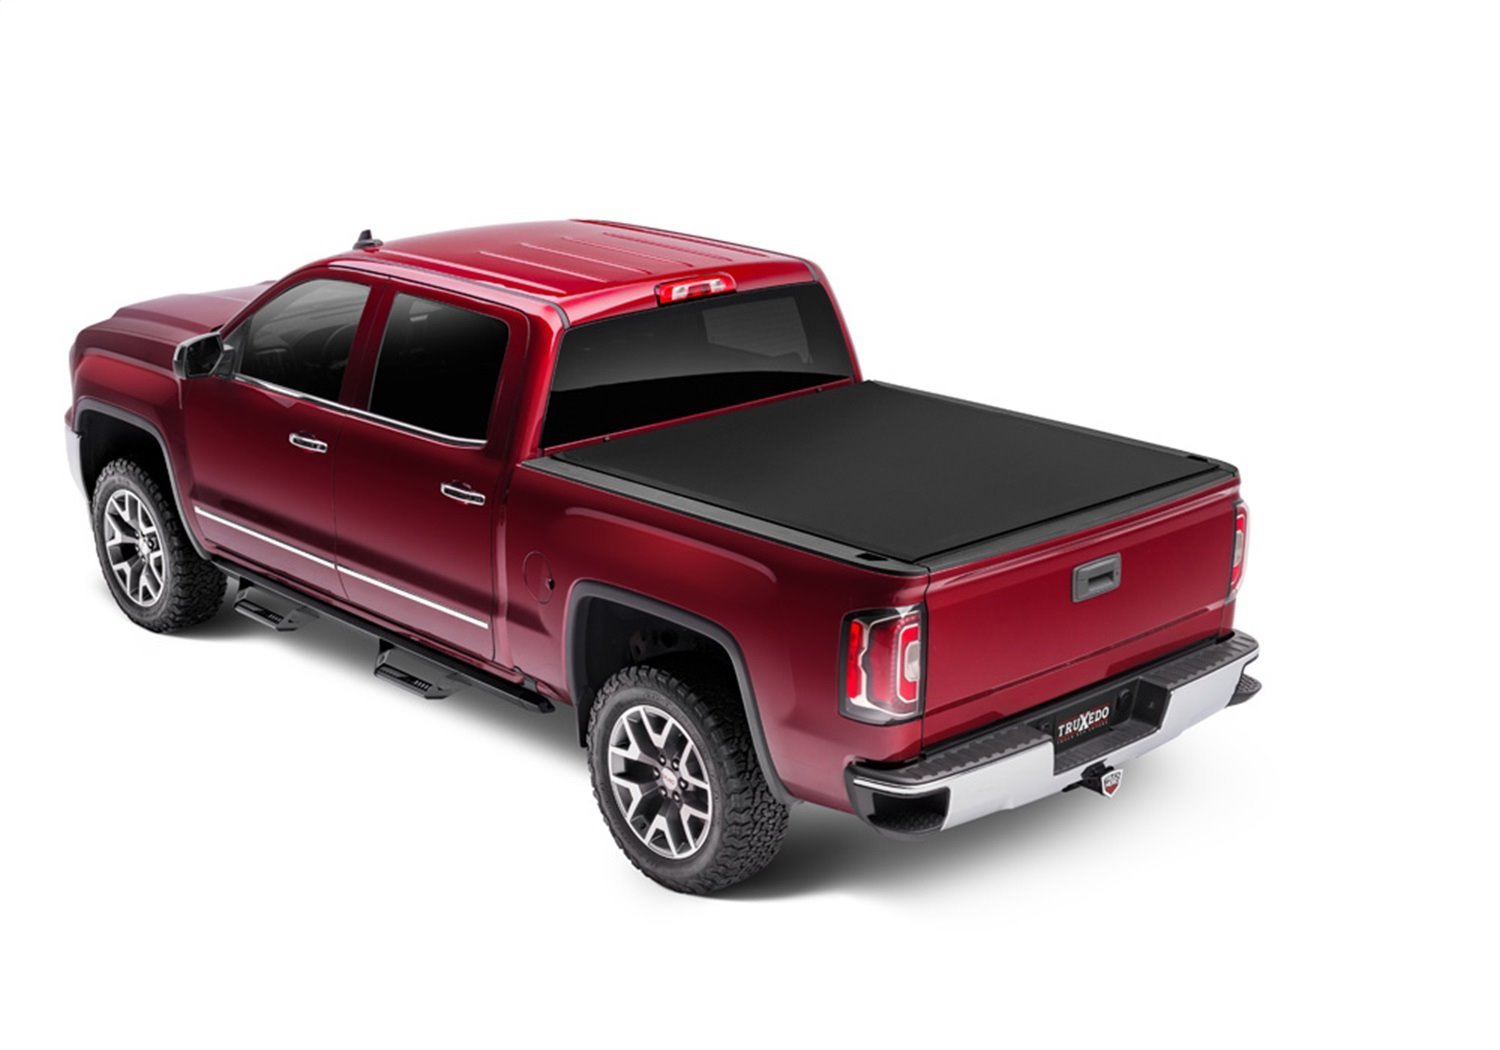 1549816 Sentry CT Hard Roll-Up Tonneau Cover for